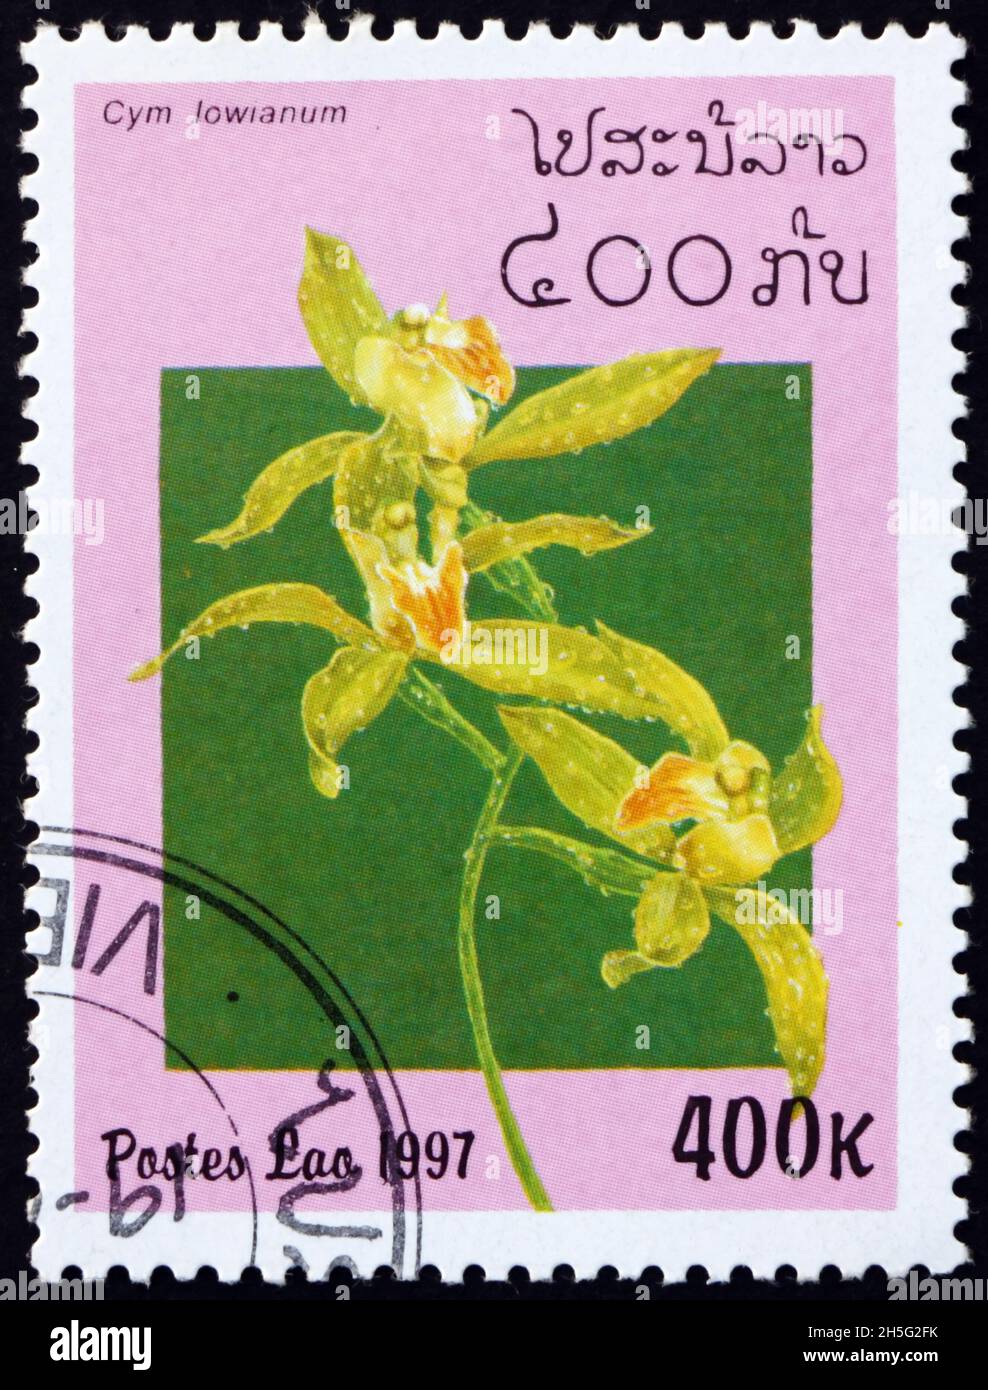 LAOS - CIRCA 1997: a stamp printed in Laos shows Lows cymbidium, cymbidium lowianum, is a species of evergreen flowering plants in the orchid family, Stock Photo